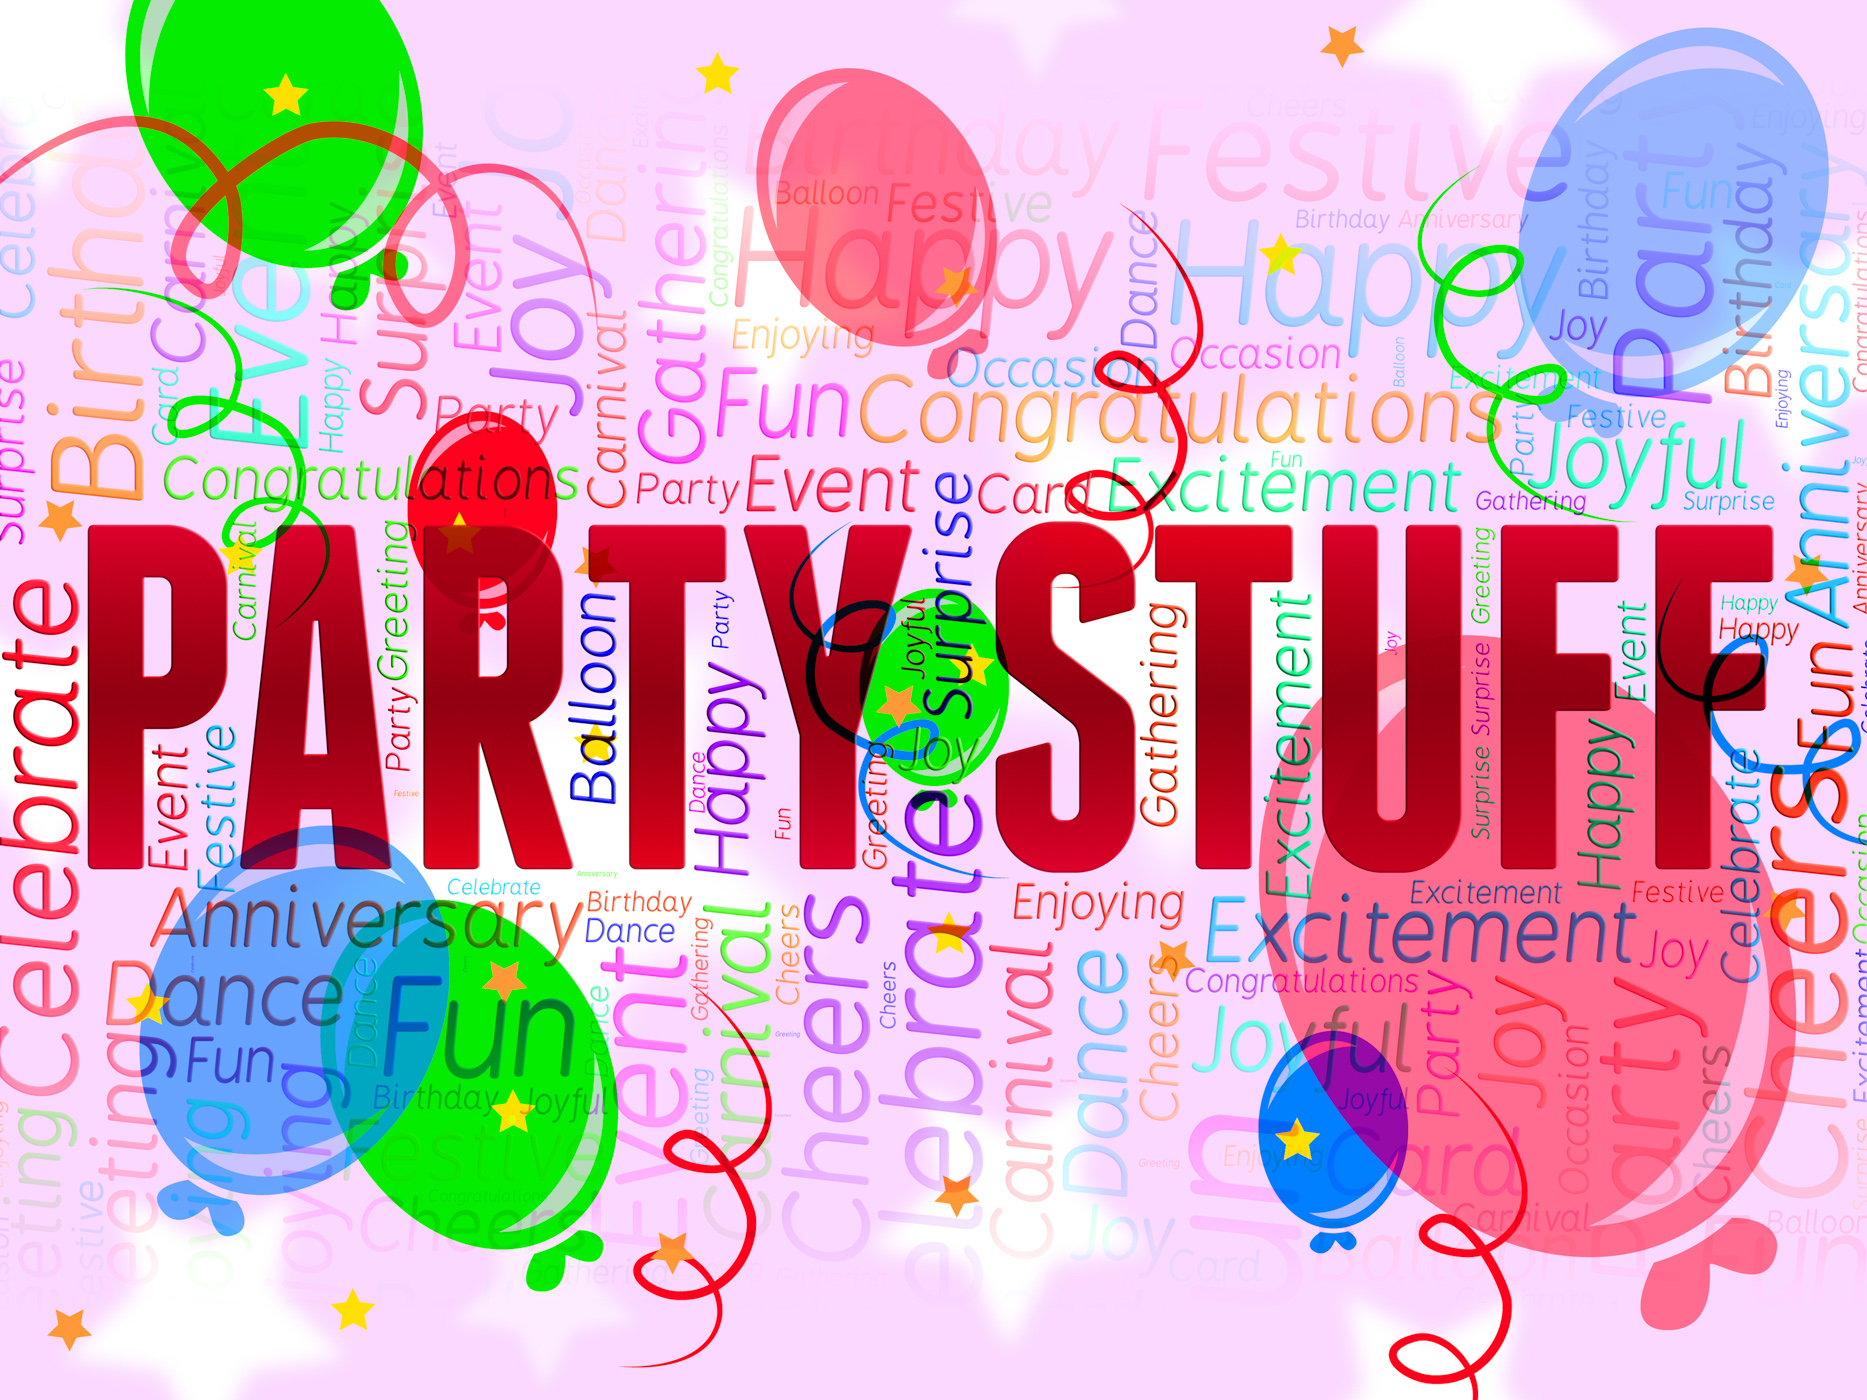 Party stuff means balloon celebrations and decoration photo